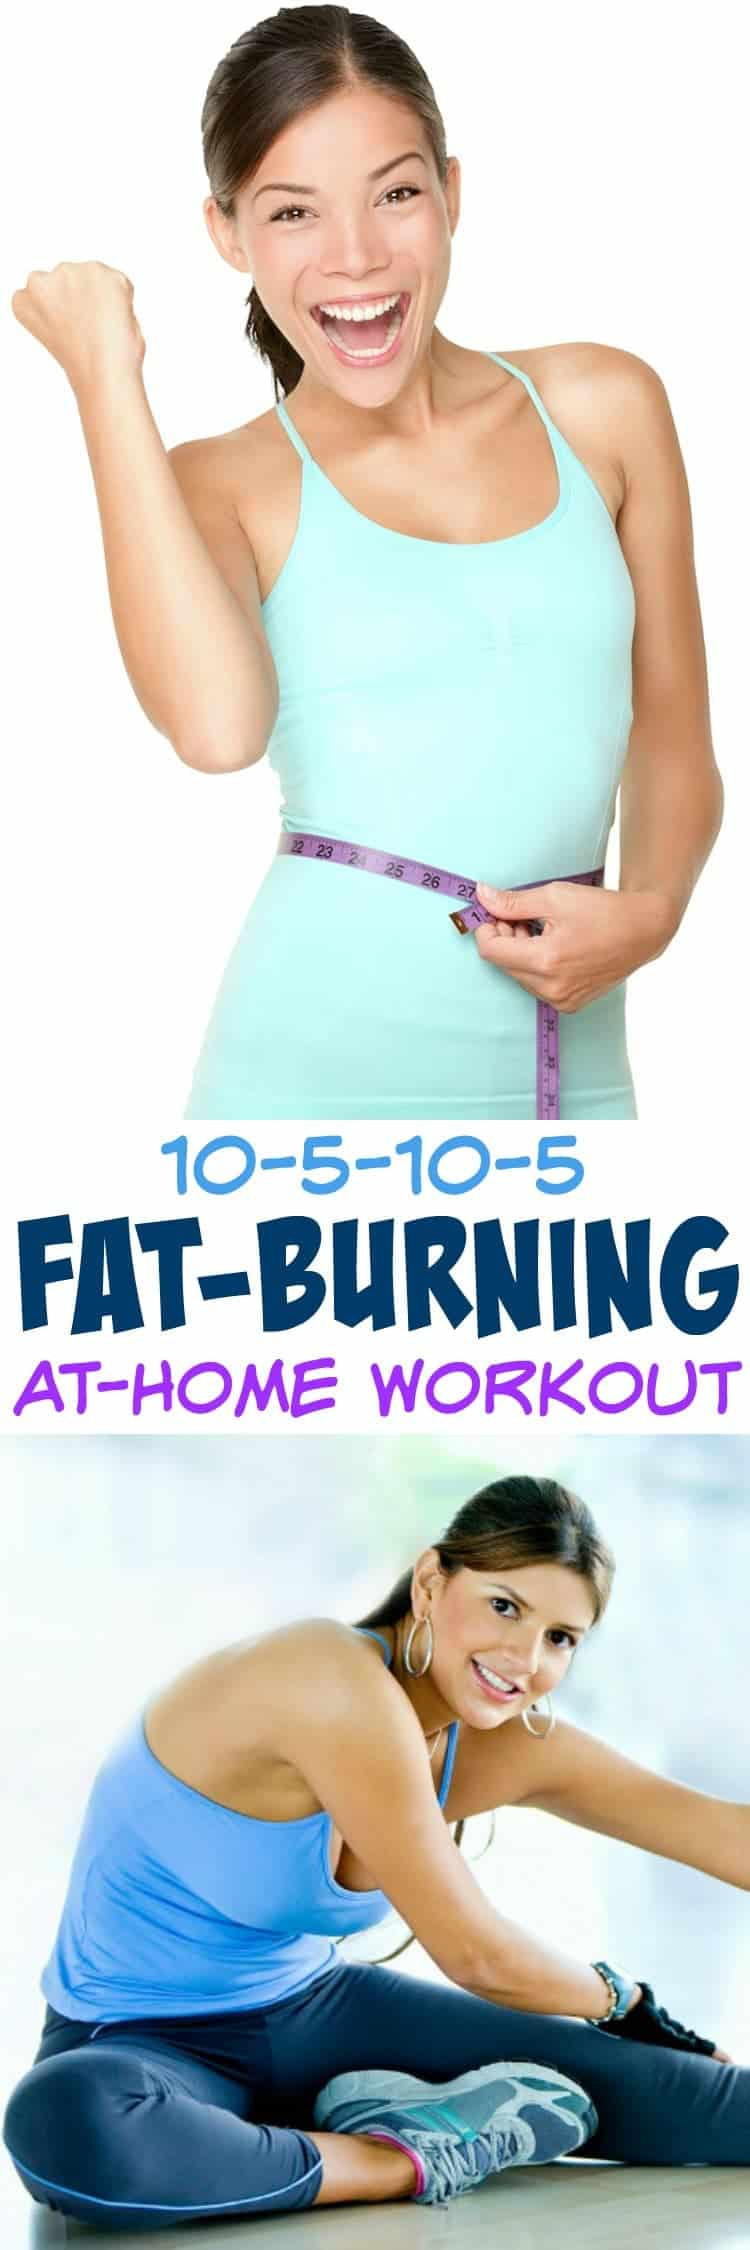 High Fat Burning Workout
 10 5 10 5 Fat Burning At Home Workout The Seasoned Mom